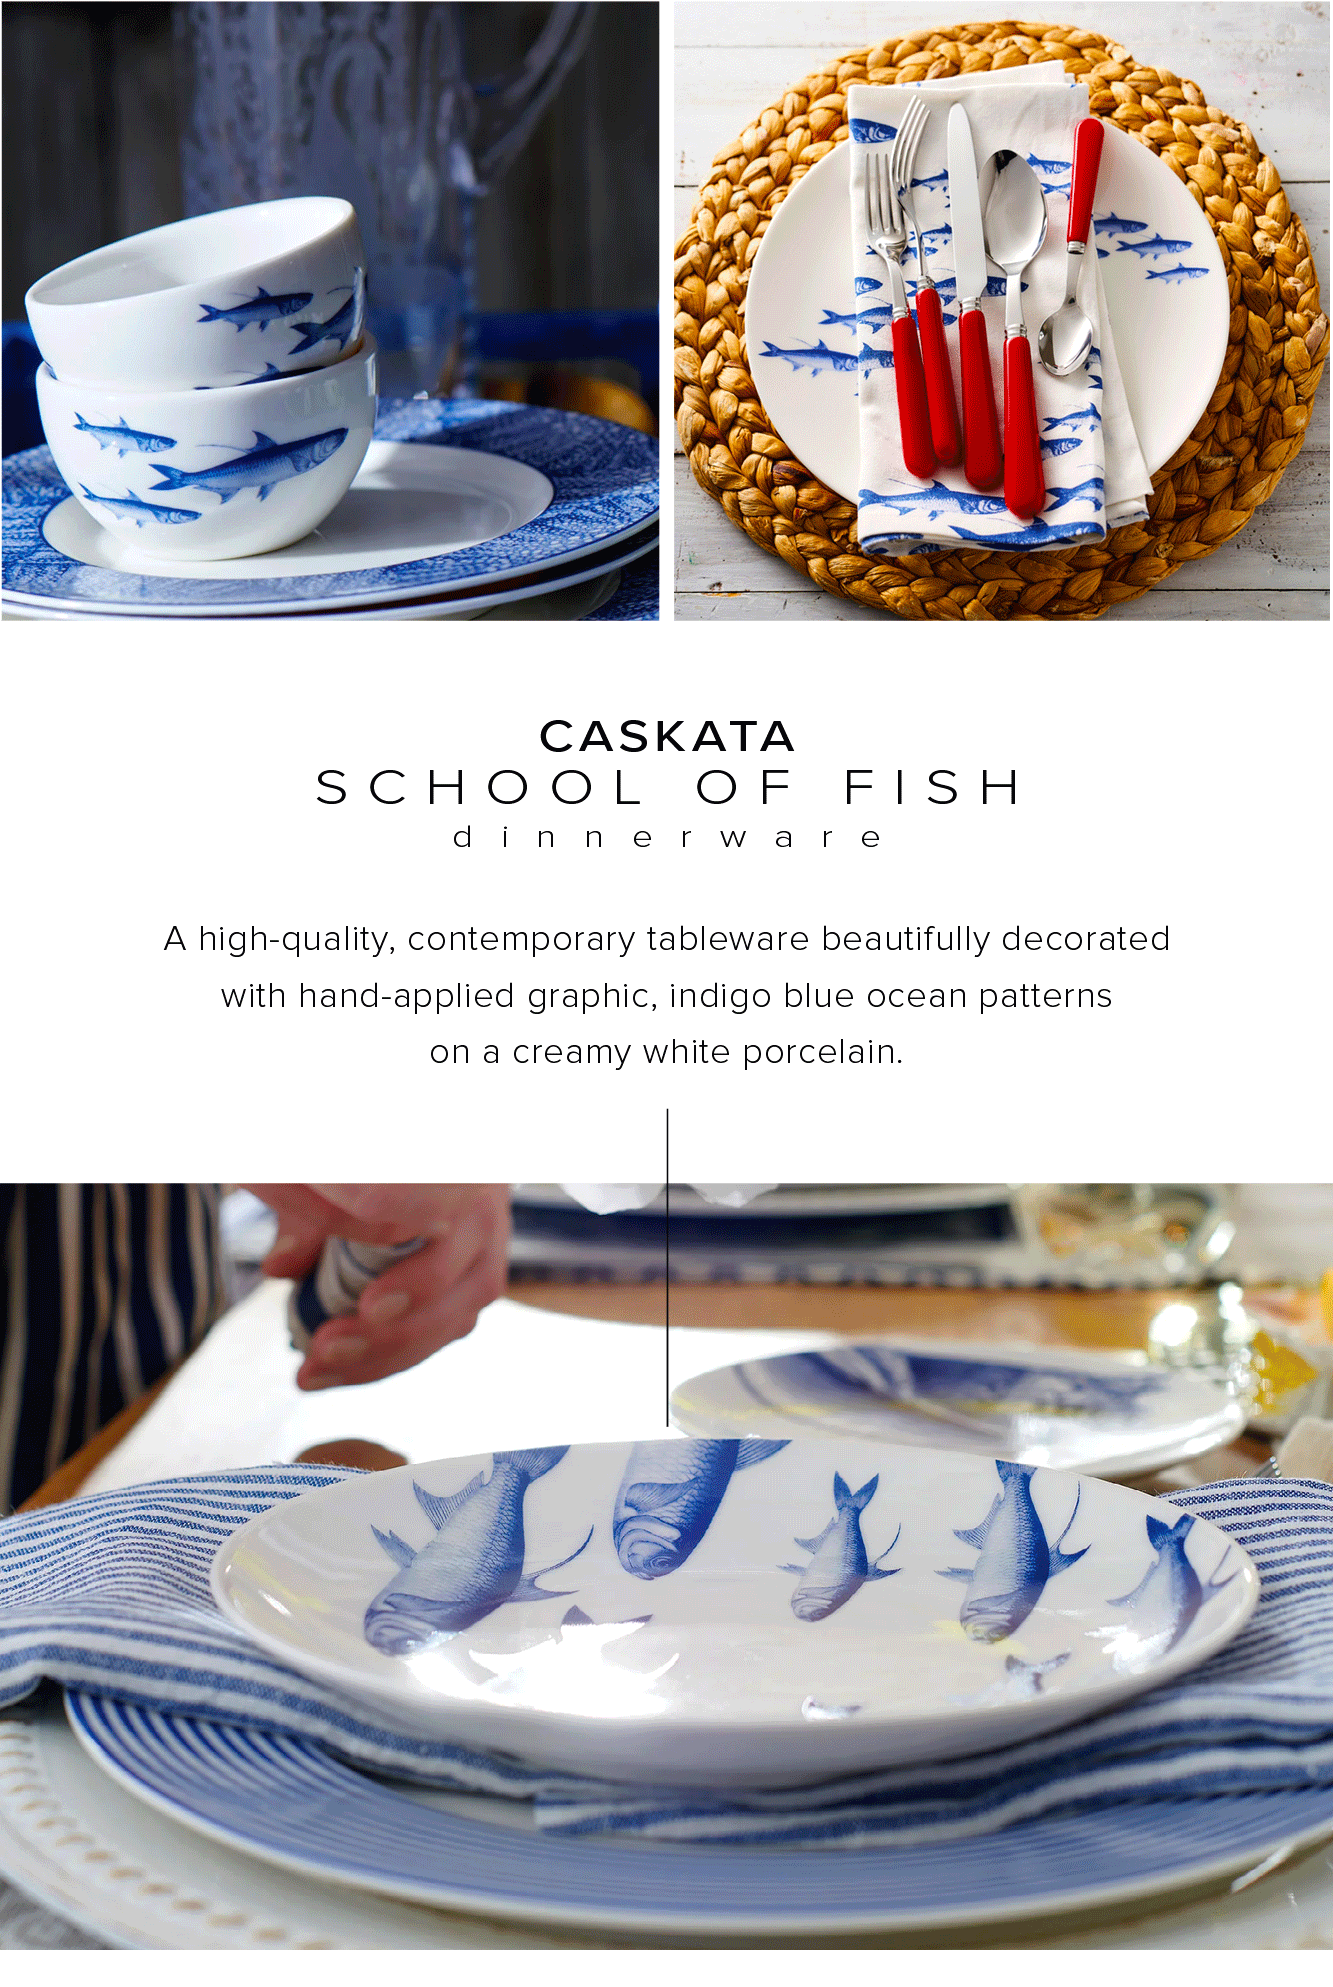  CASKATA SCHOOL OF FISH dinnerware A high-quality, contemporary tableware beautifully decorated with hand-applied graphic, indigo blue ocean patterns on a creamy white porcelain. 